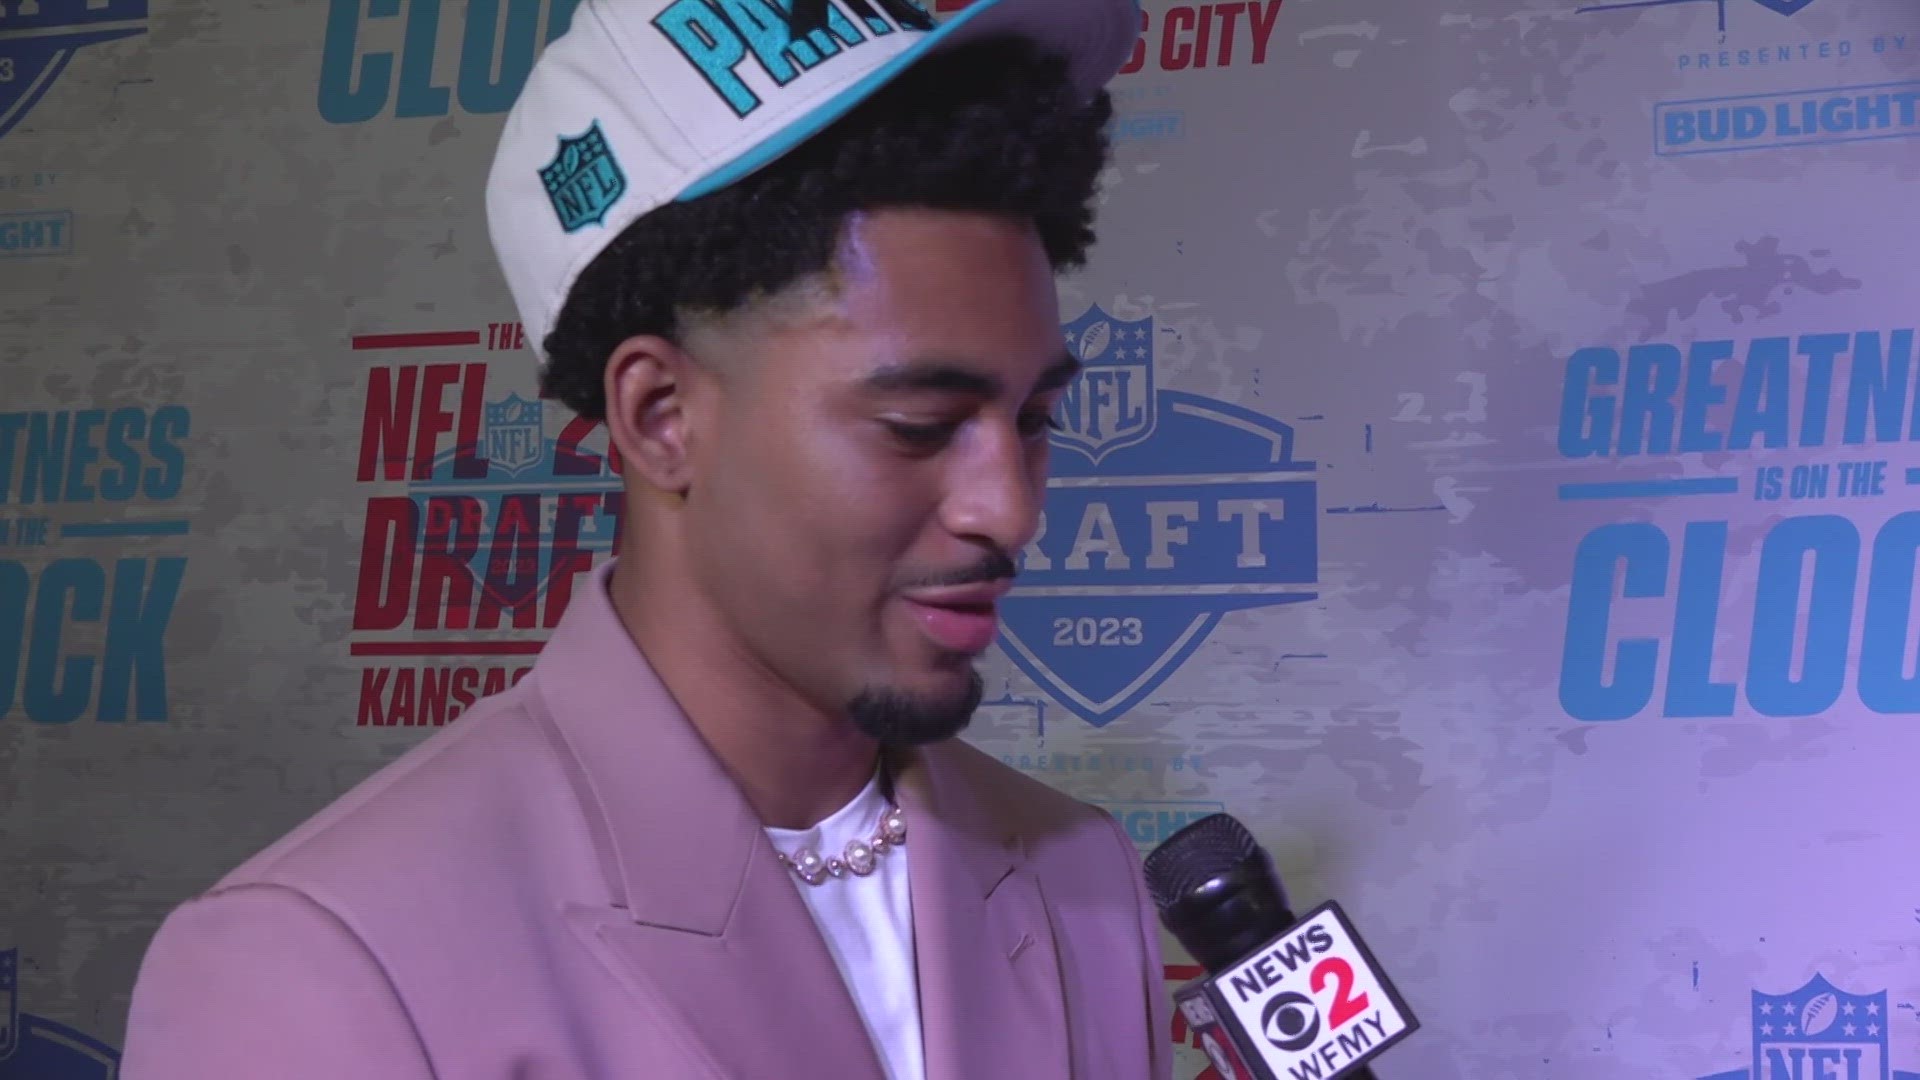 WFMY News 2 had a one-on-one interview with the first overall pick after he got off the draft stage.